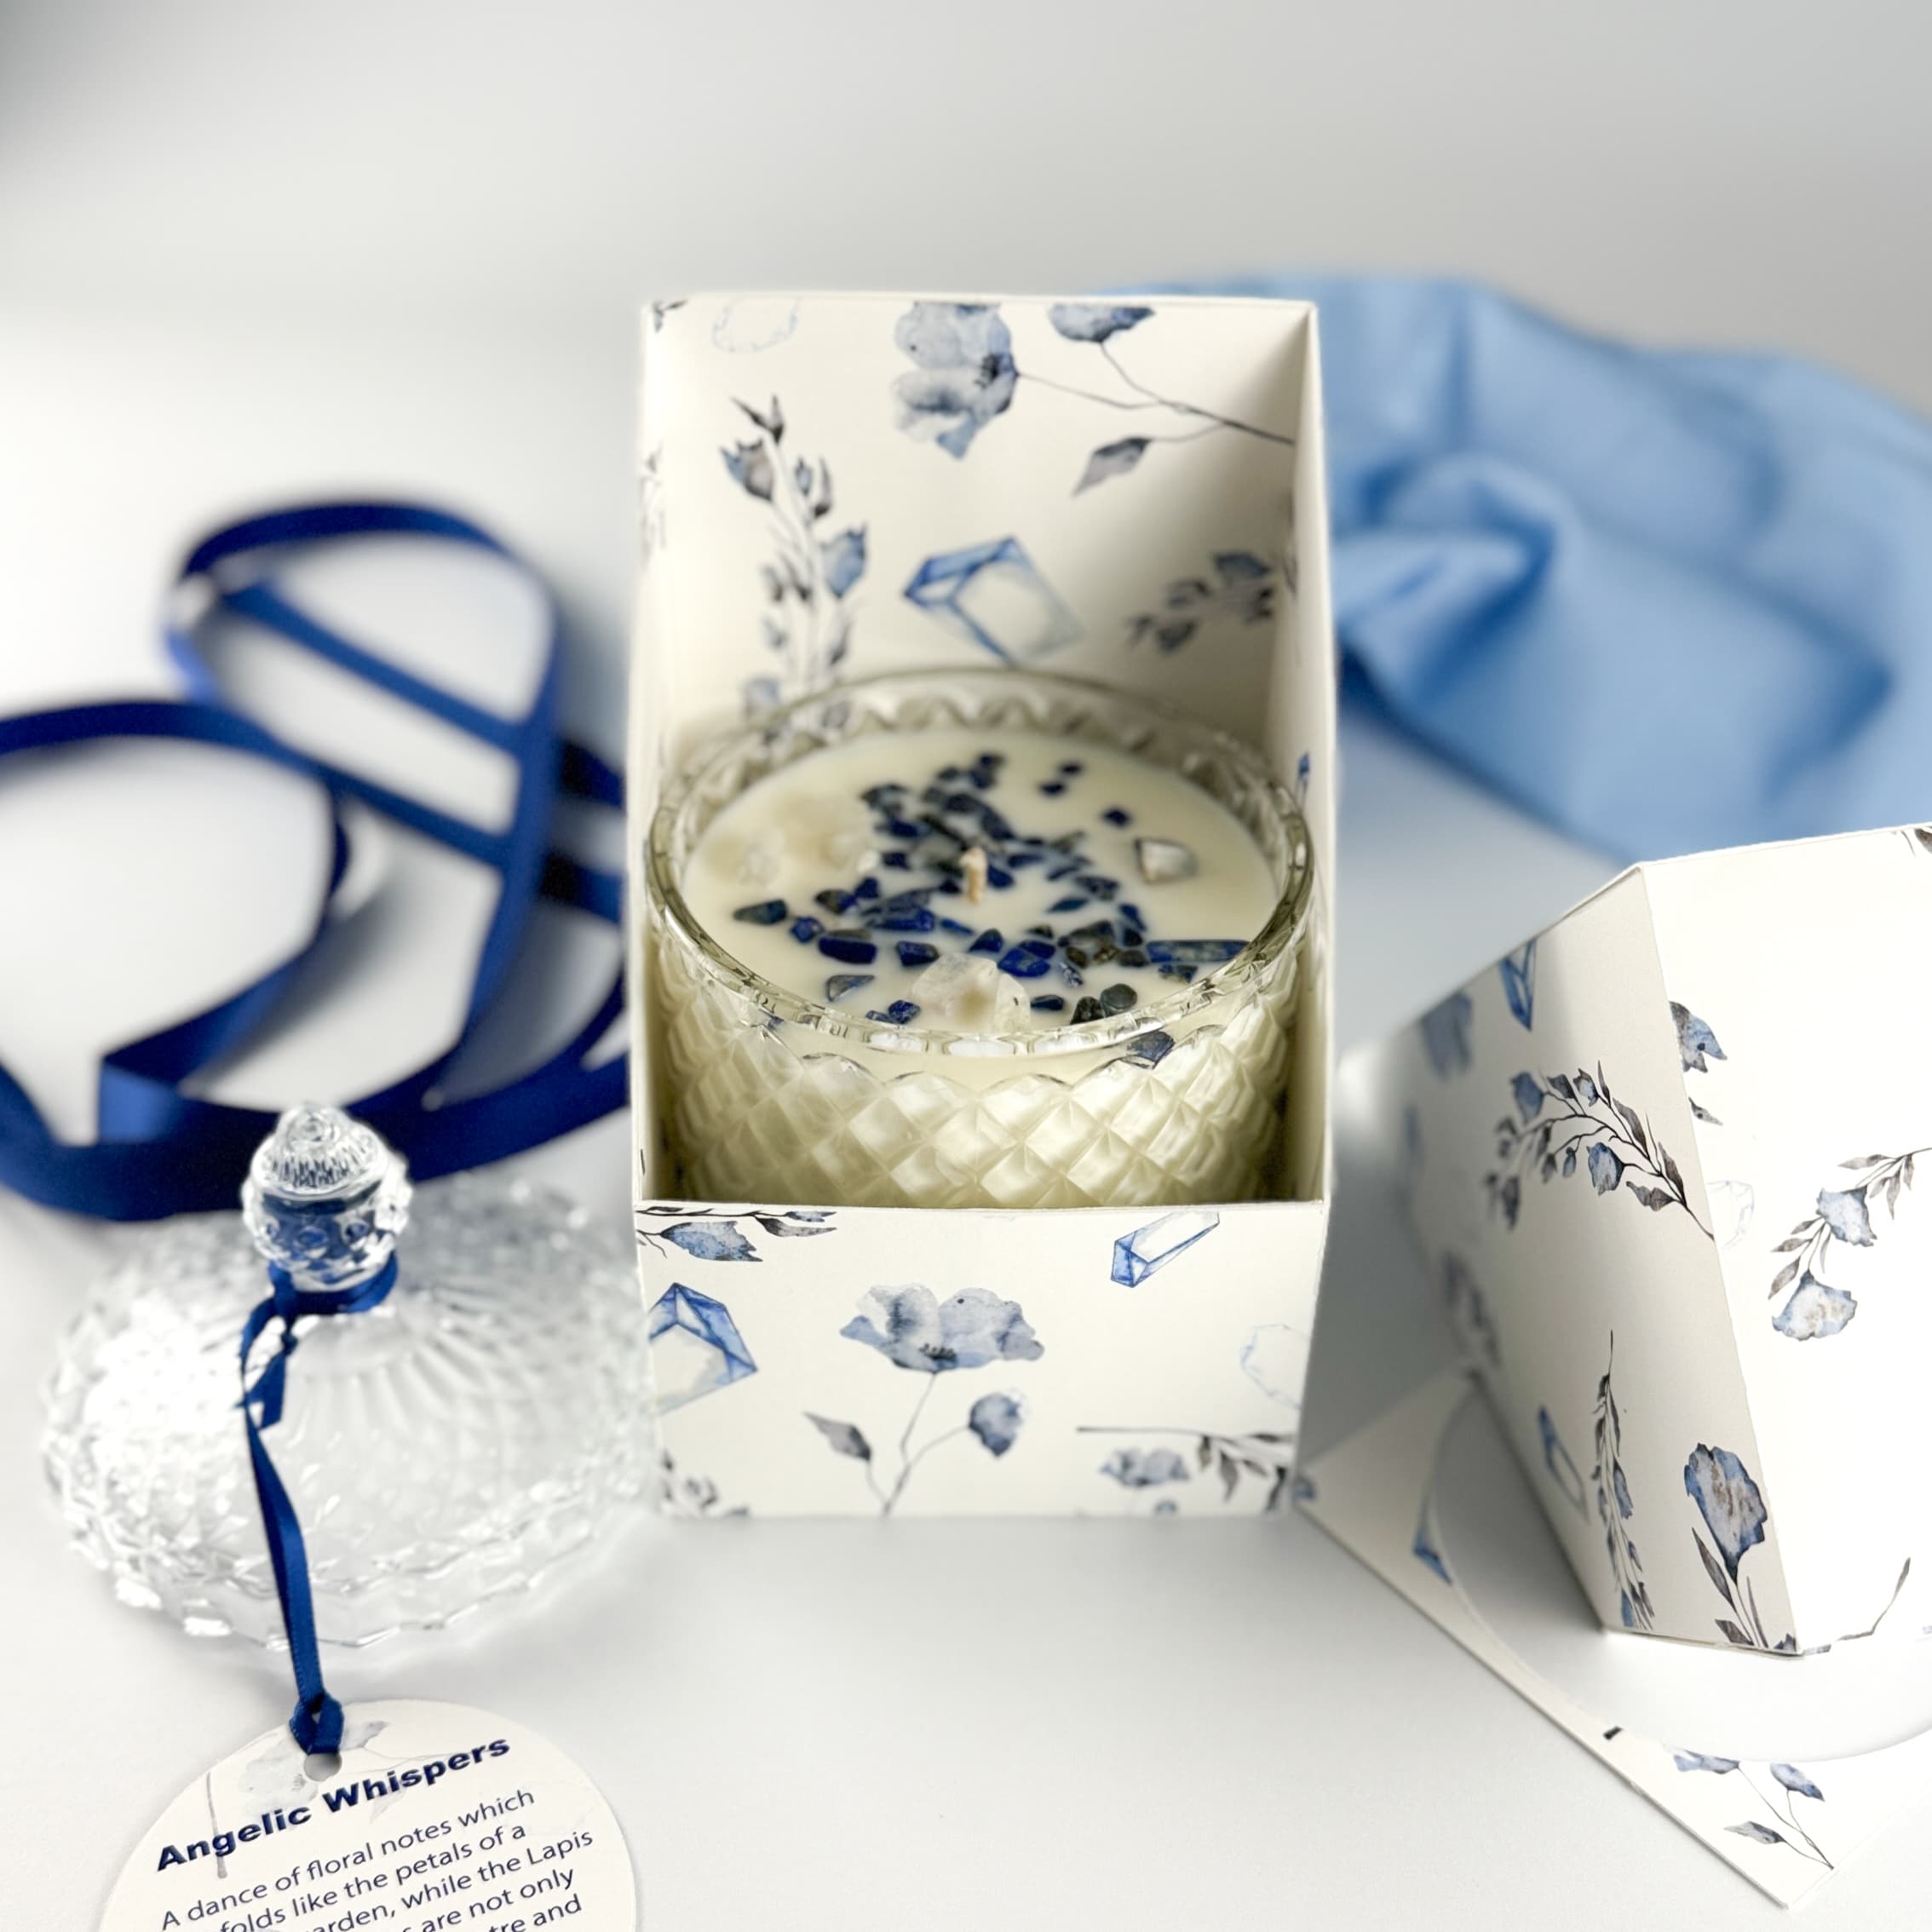 Angelic Whispers floral handpoured soy wax candle in Art Deco Crystal Glass embellished with lapus lazuli. The lid is off and beside it with a label tied in navy blue ribbons sitting beside the candle infront of an open product box with a rustal and floral print